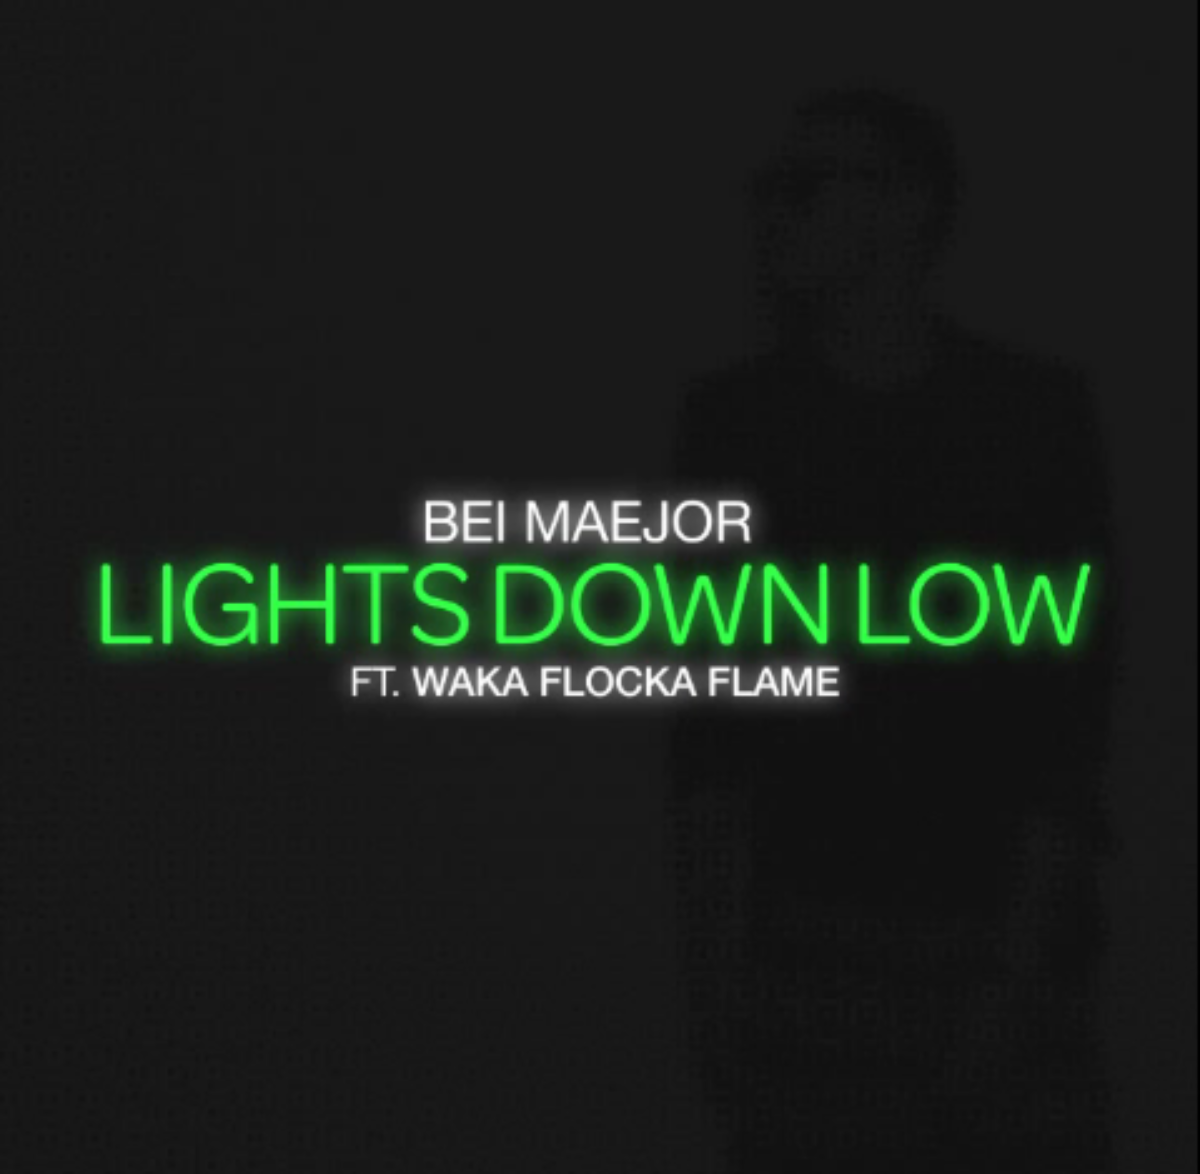 Light down speed. Light down Low bei Maejor обложка. Maejor Lights down Low. Maejor Lights down Low обложка. Lights down Low Waka Flocka Flame.